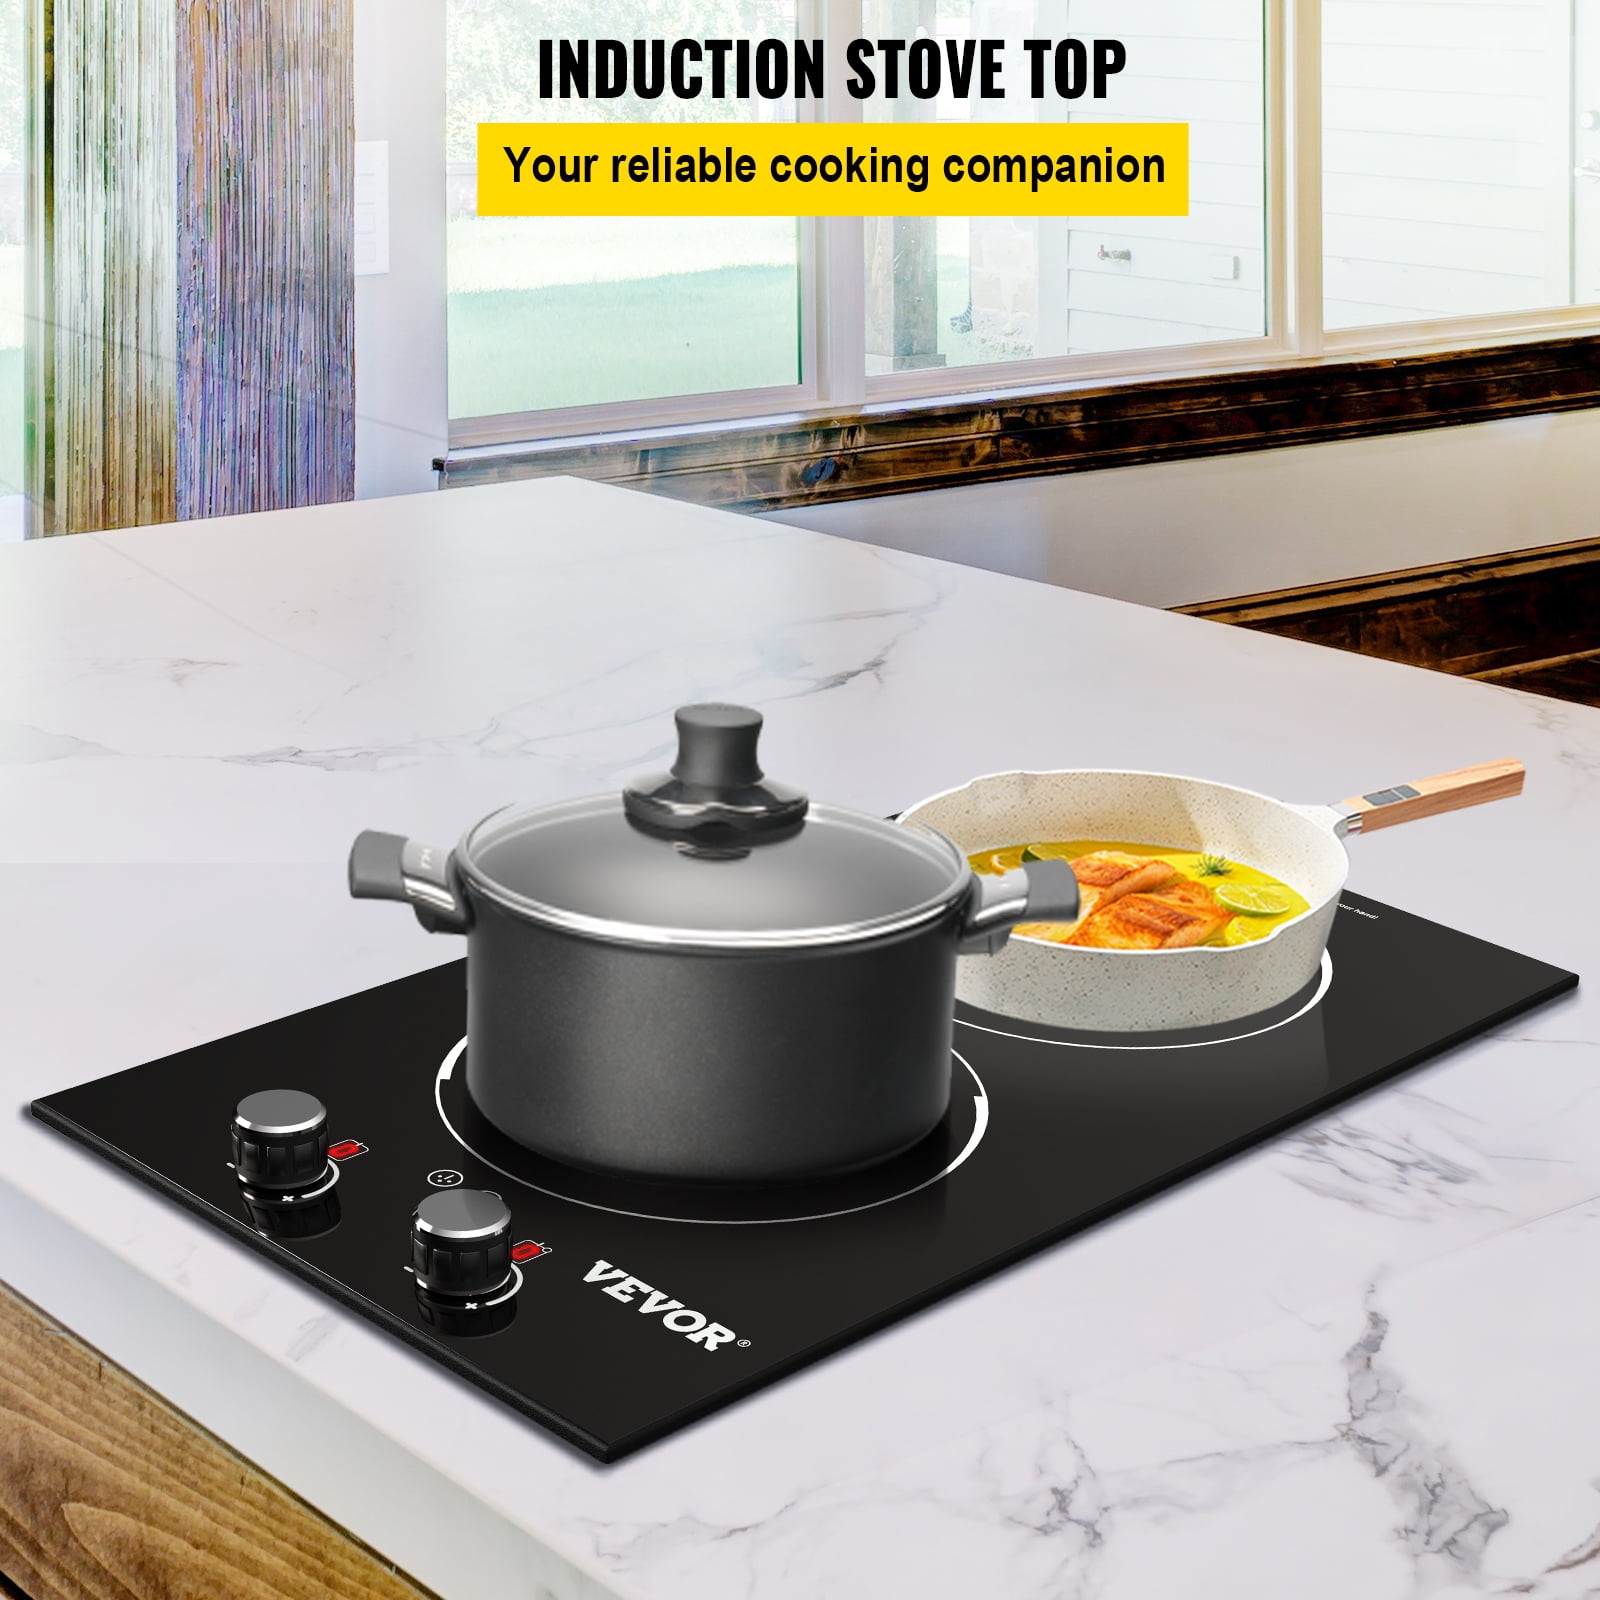 Doumigo Induction Cooktop, 4 Burner with Boost, 30 Inch Electric Cooktop,  Including Flexi Bridge Element, Max Power 4000W, 240V Fast Heat Induction